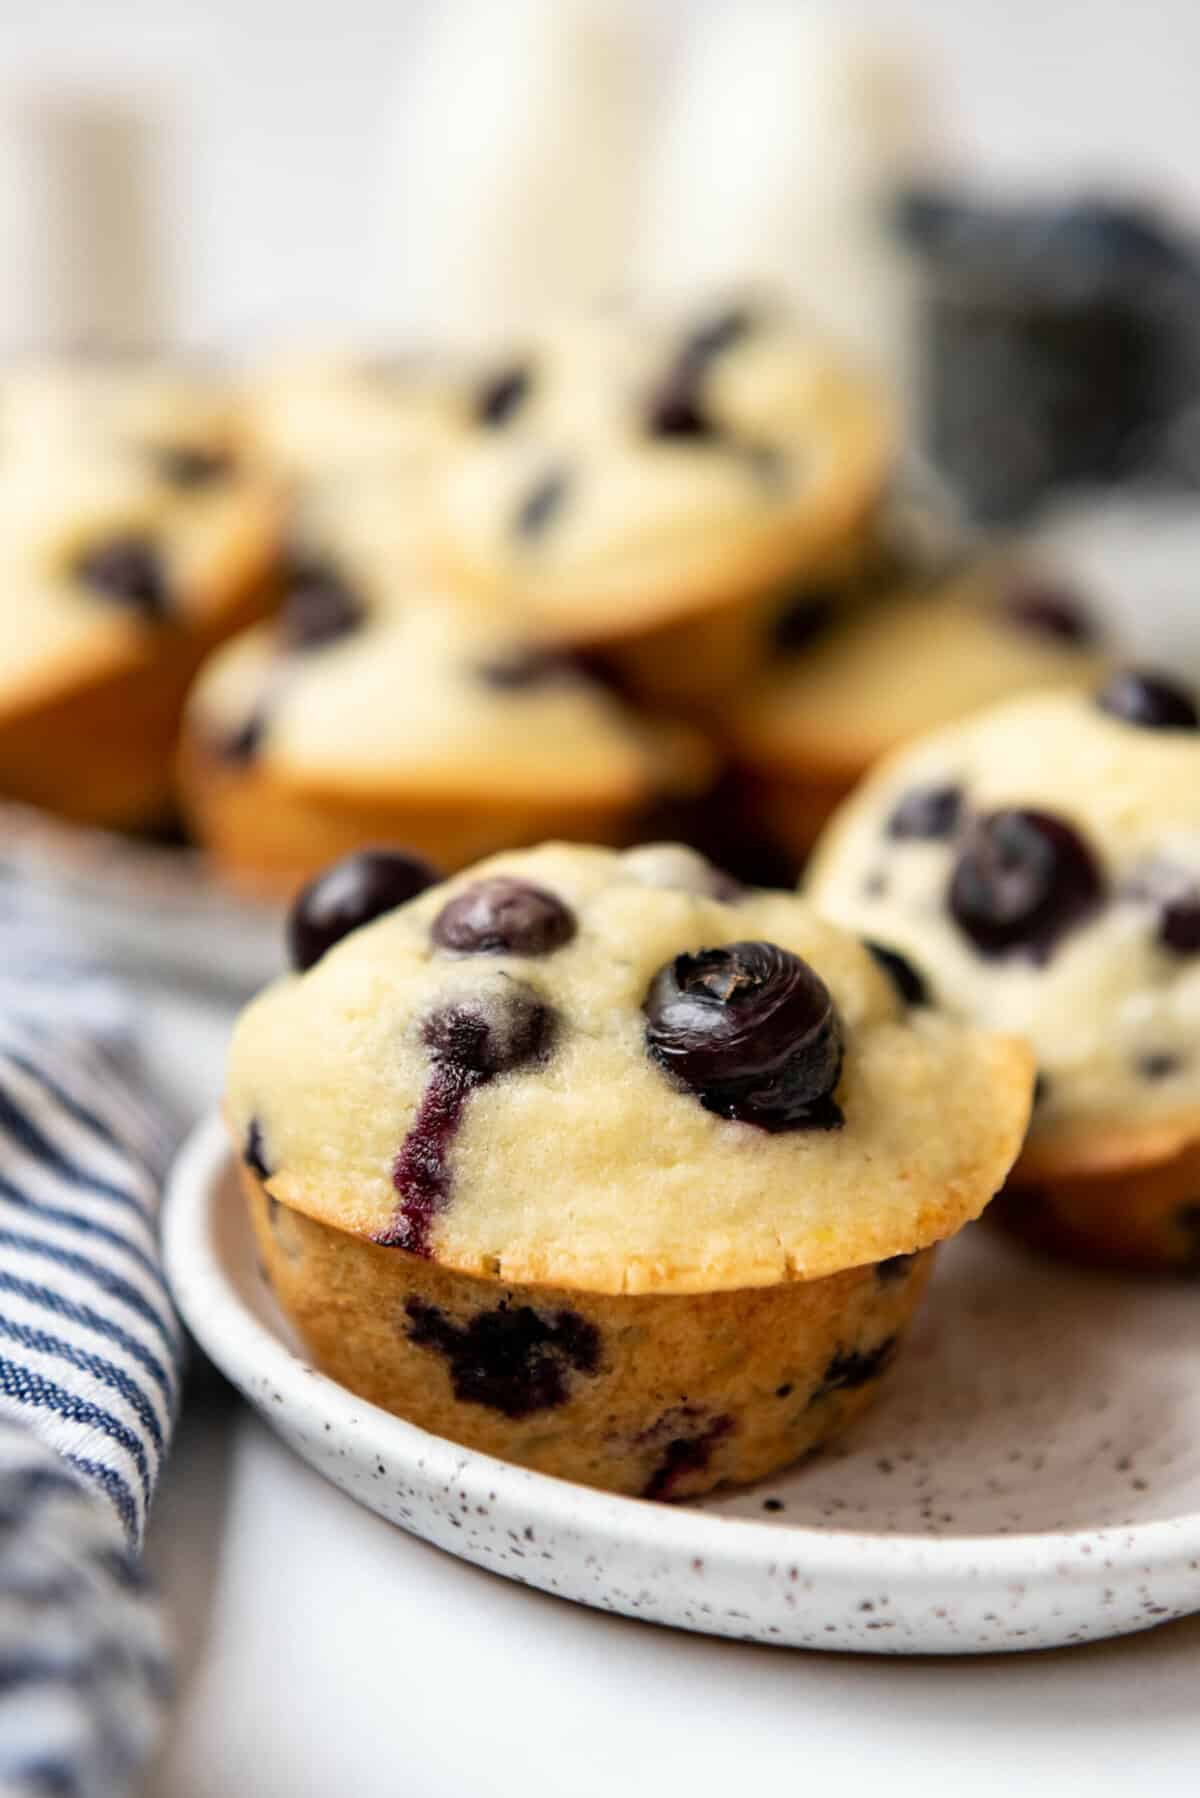 A blueberry muffin on a plate with more muffins behind it.